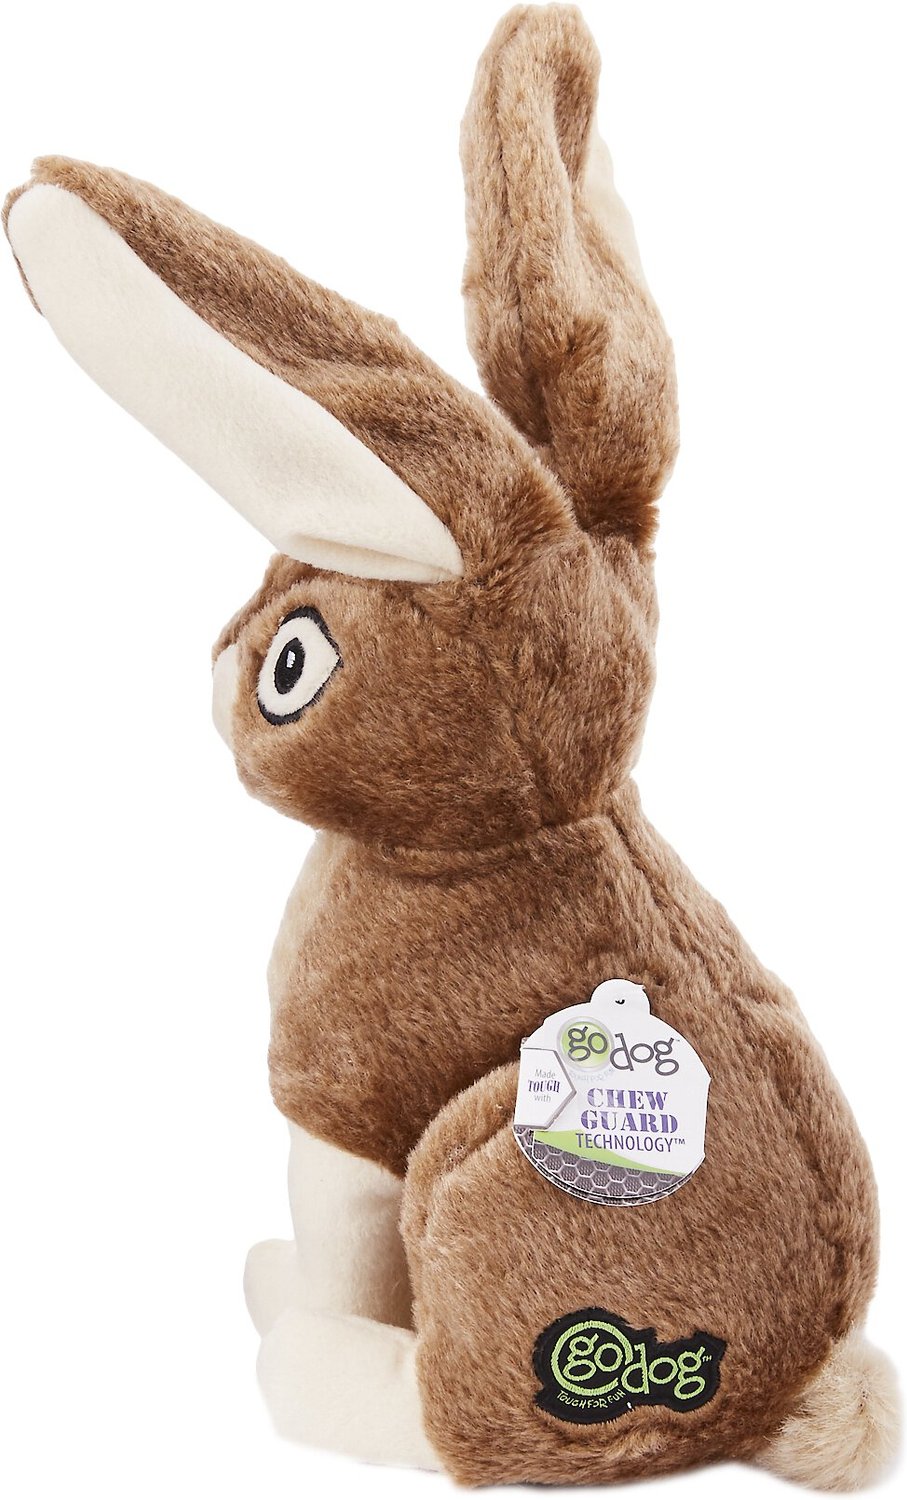 maojin Plush Bunny Battery Operated,Hopping Walk Sway Its Tail Rabbit Interactive and Educational Plush Cute Pet Toy for Children Boy Girls,Comes with Cute Scarf Accessories and Soft Plush,Brown